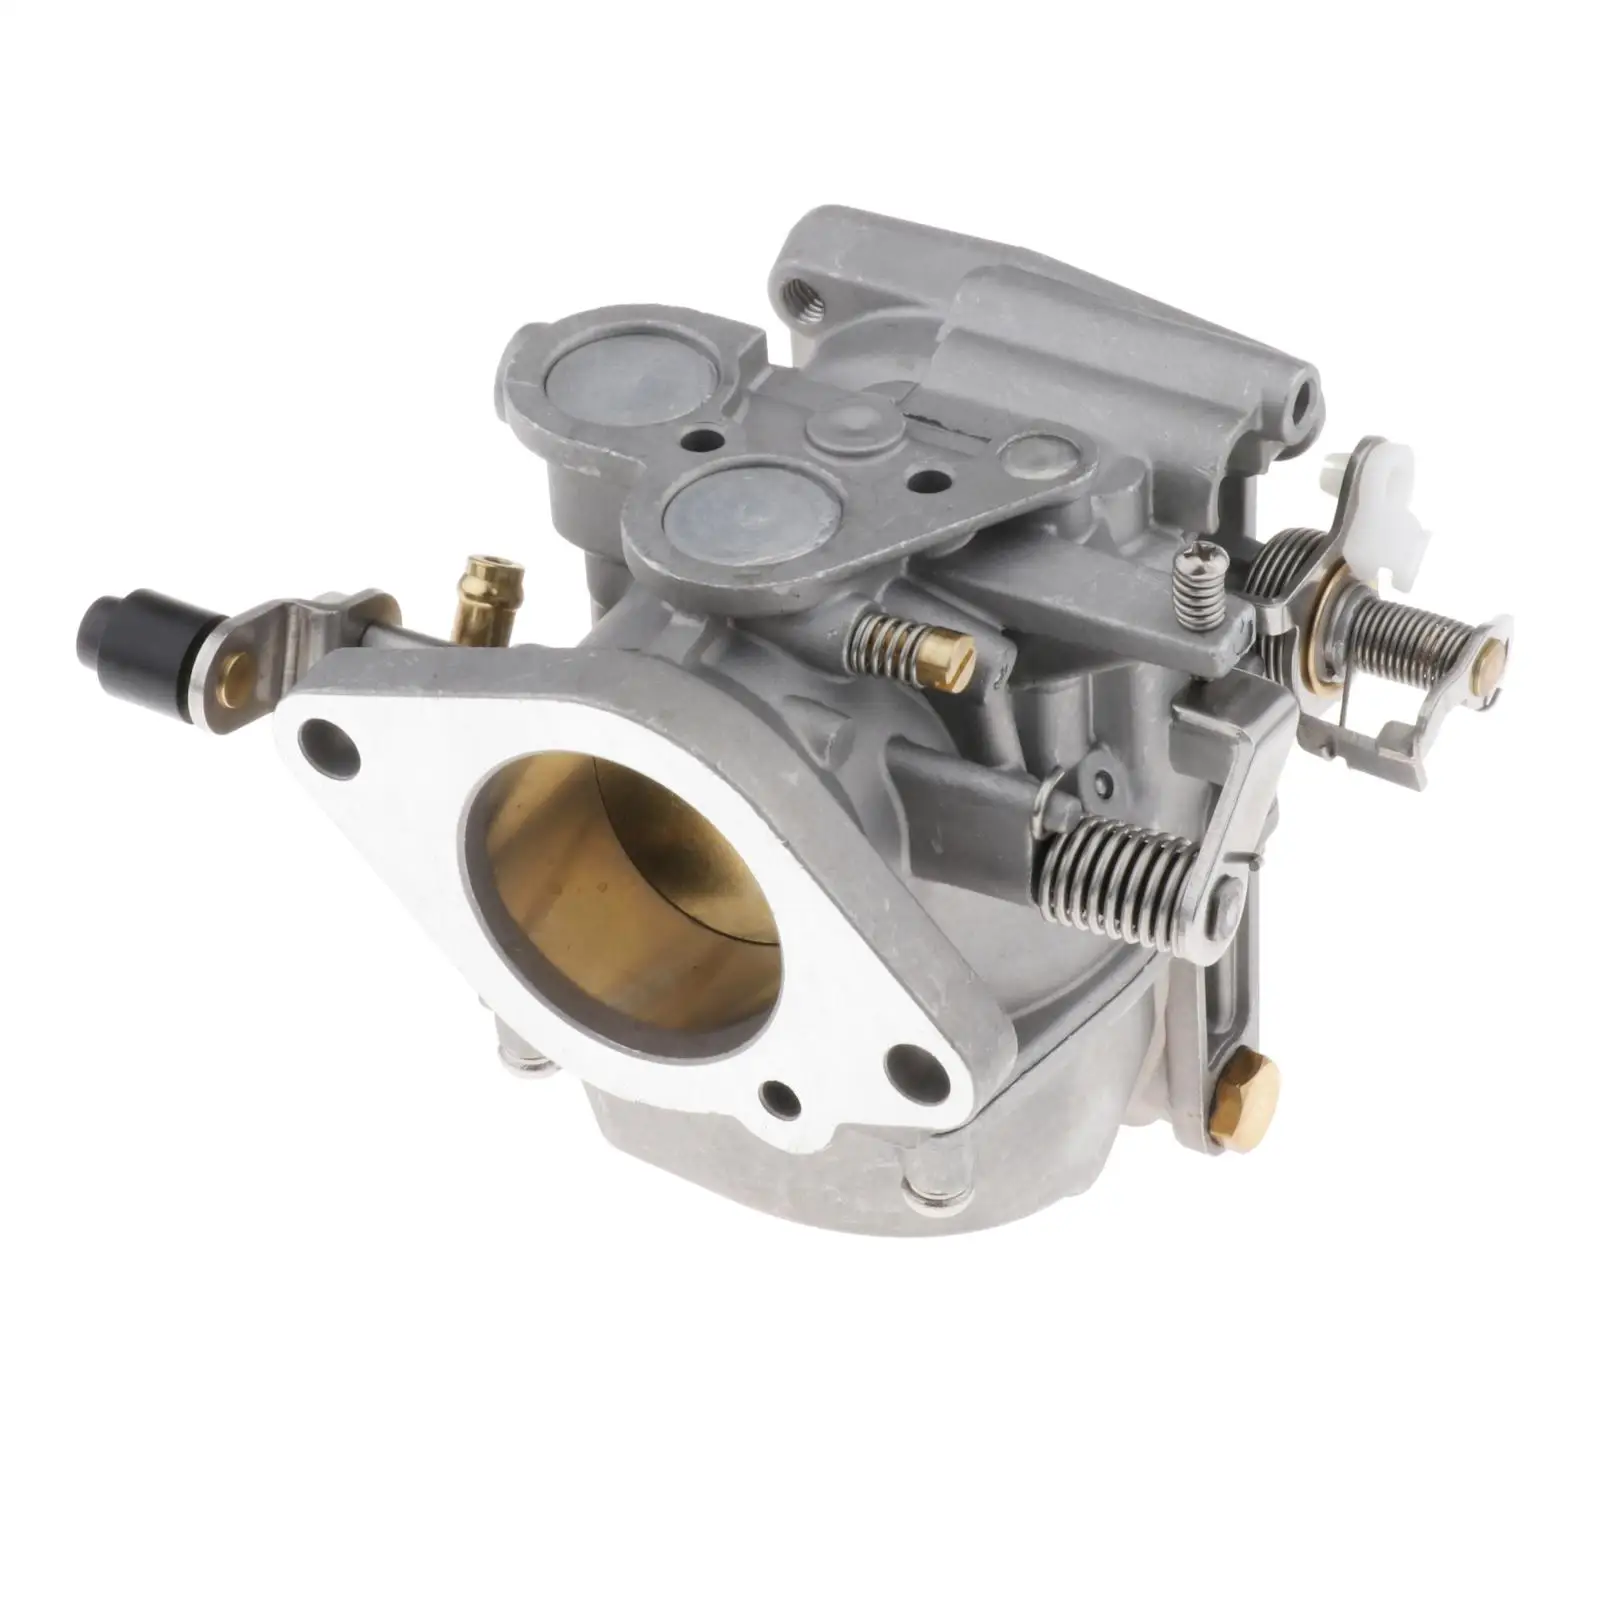 Carburetor Carb For Tohatsu Nissan 25HP M25C 30HP M30A 25C3 30A4 2-Stroke